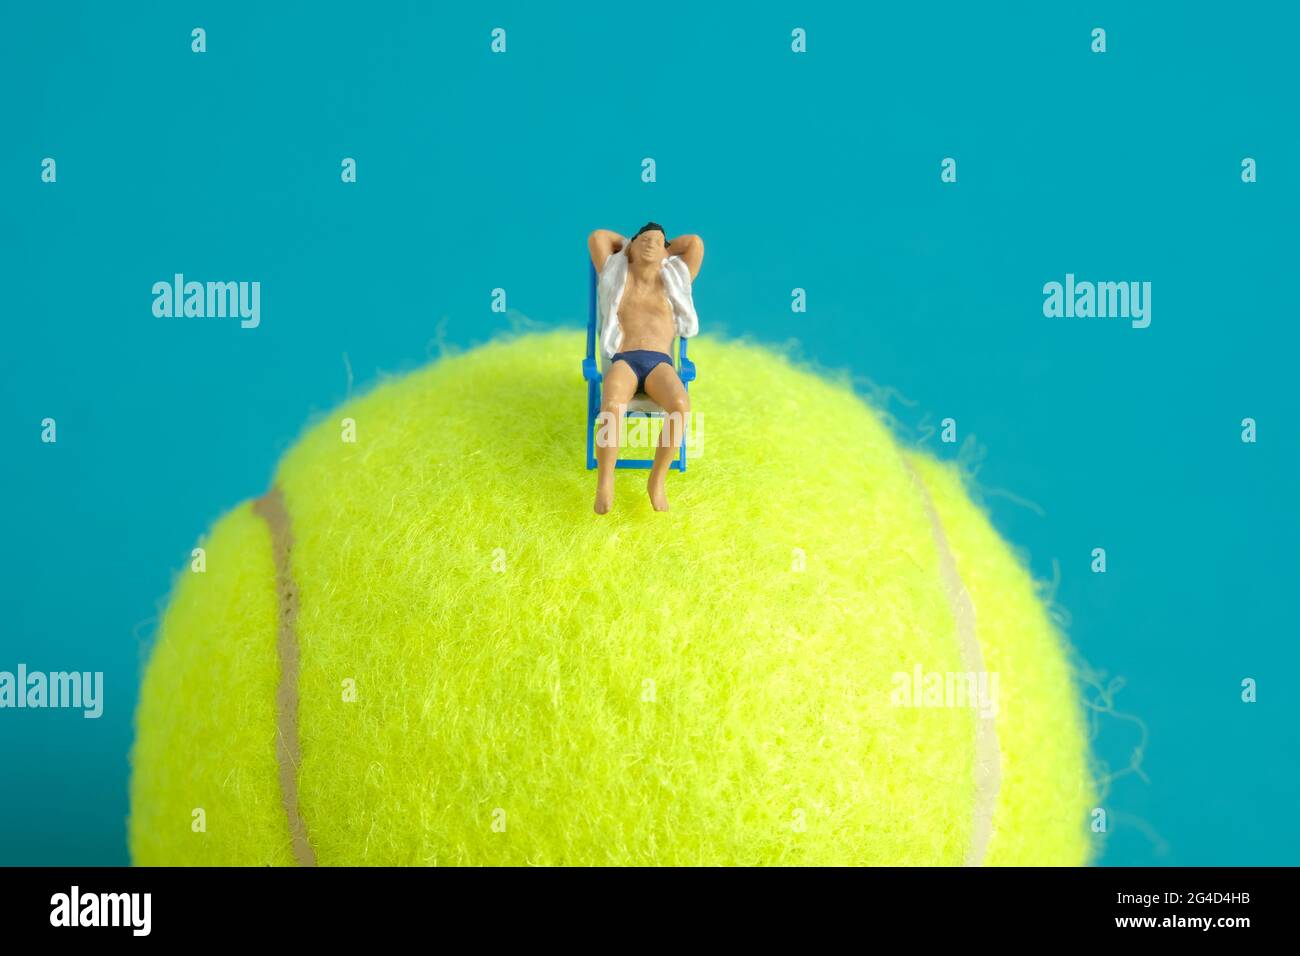 Miniature people toy figure photography. Travel destination concept, Men relaxing at beach chair above tennis ball, isolated on blue background. Image Stock Photo